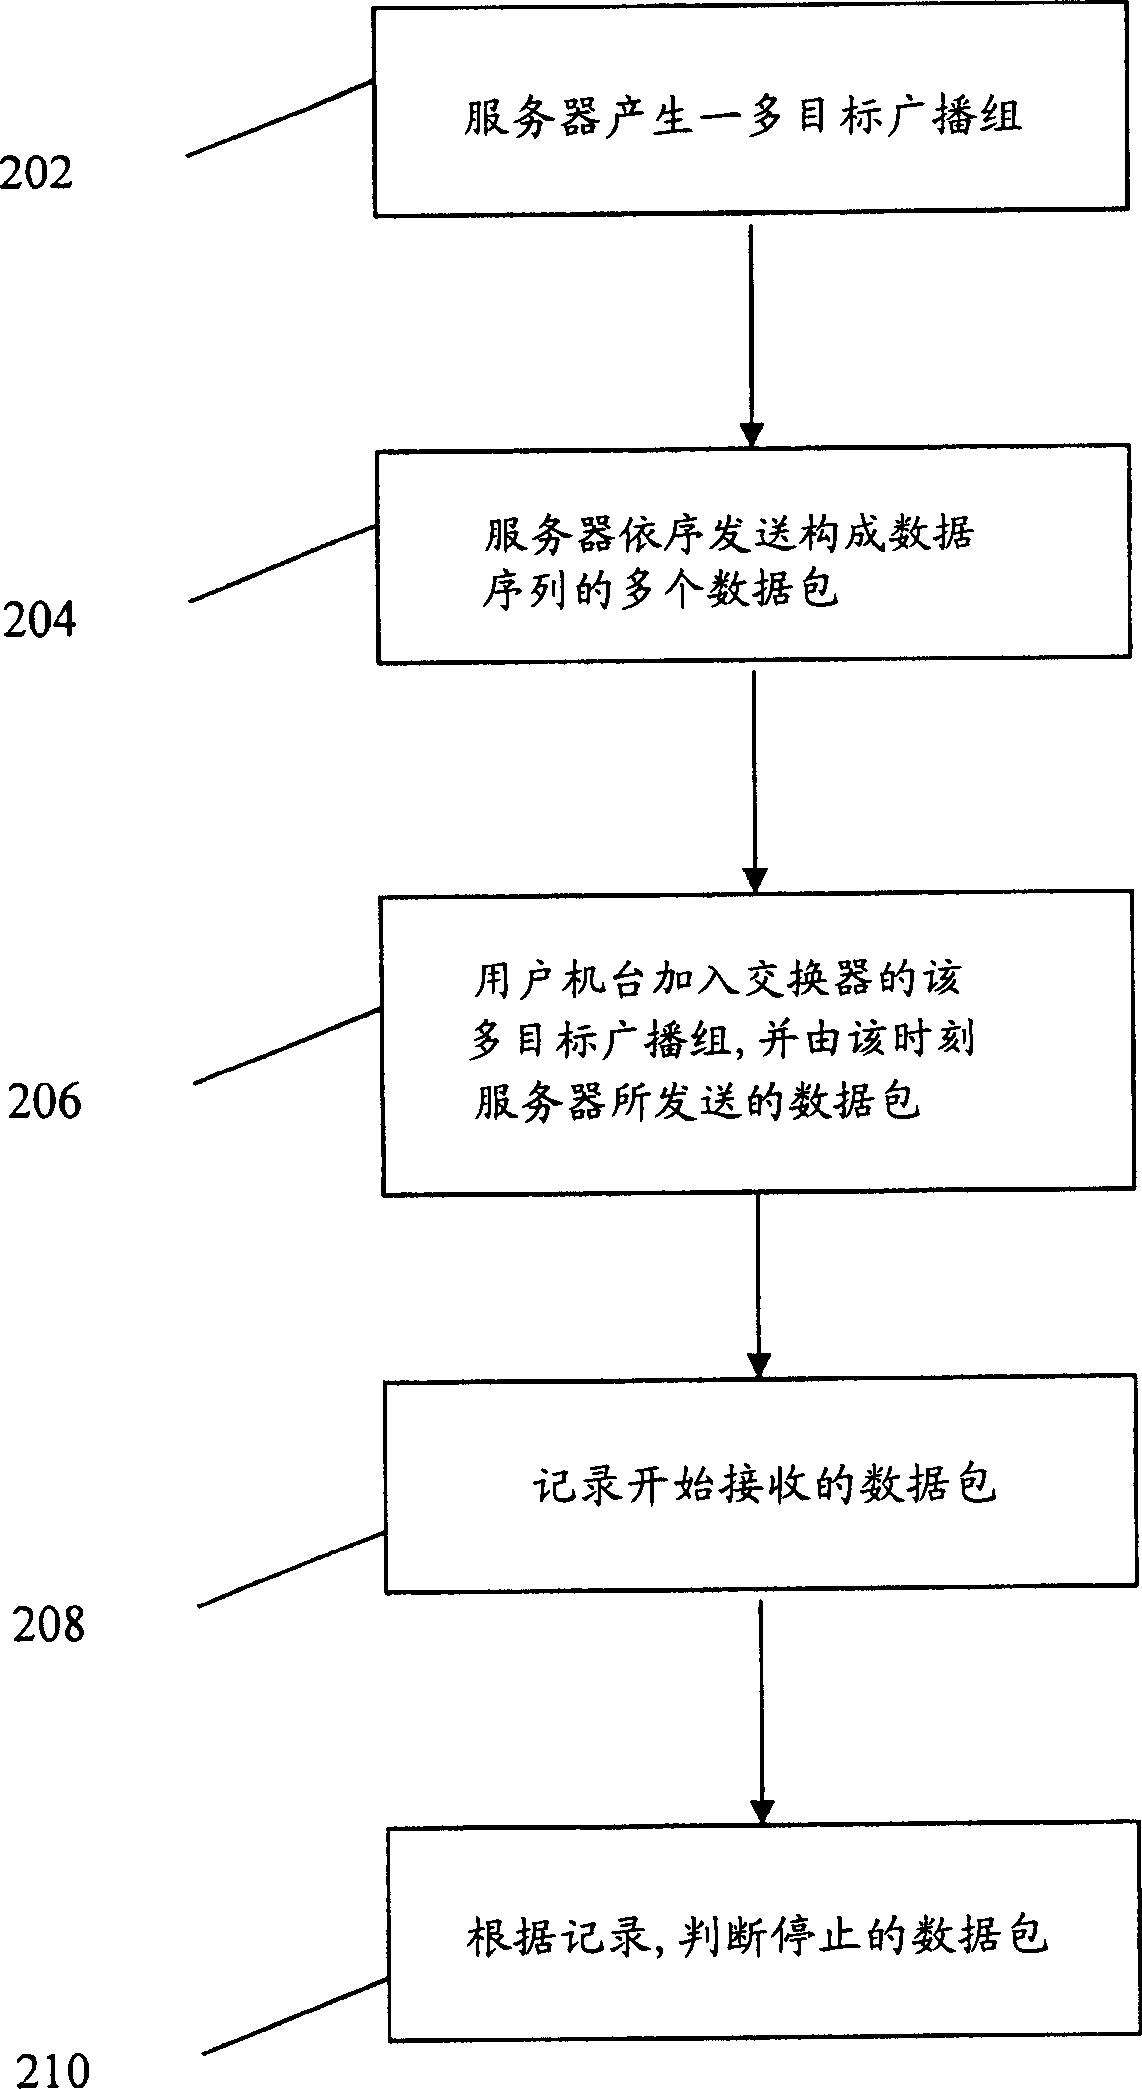 Method and system for carrying out data transmission by means of multicast